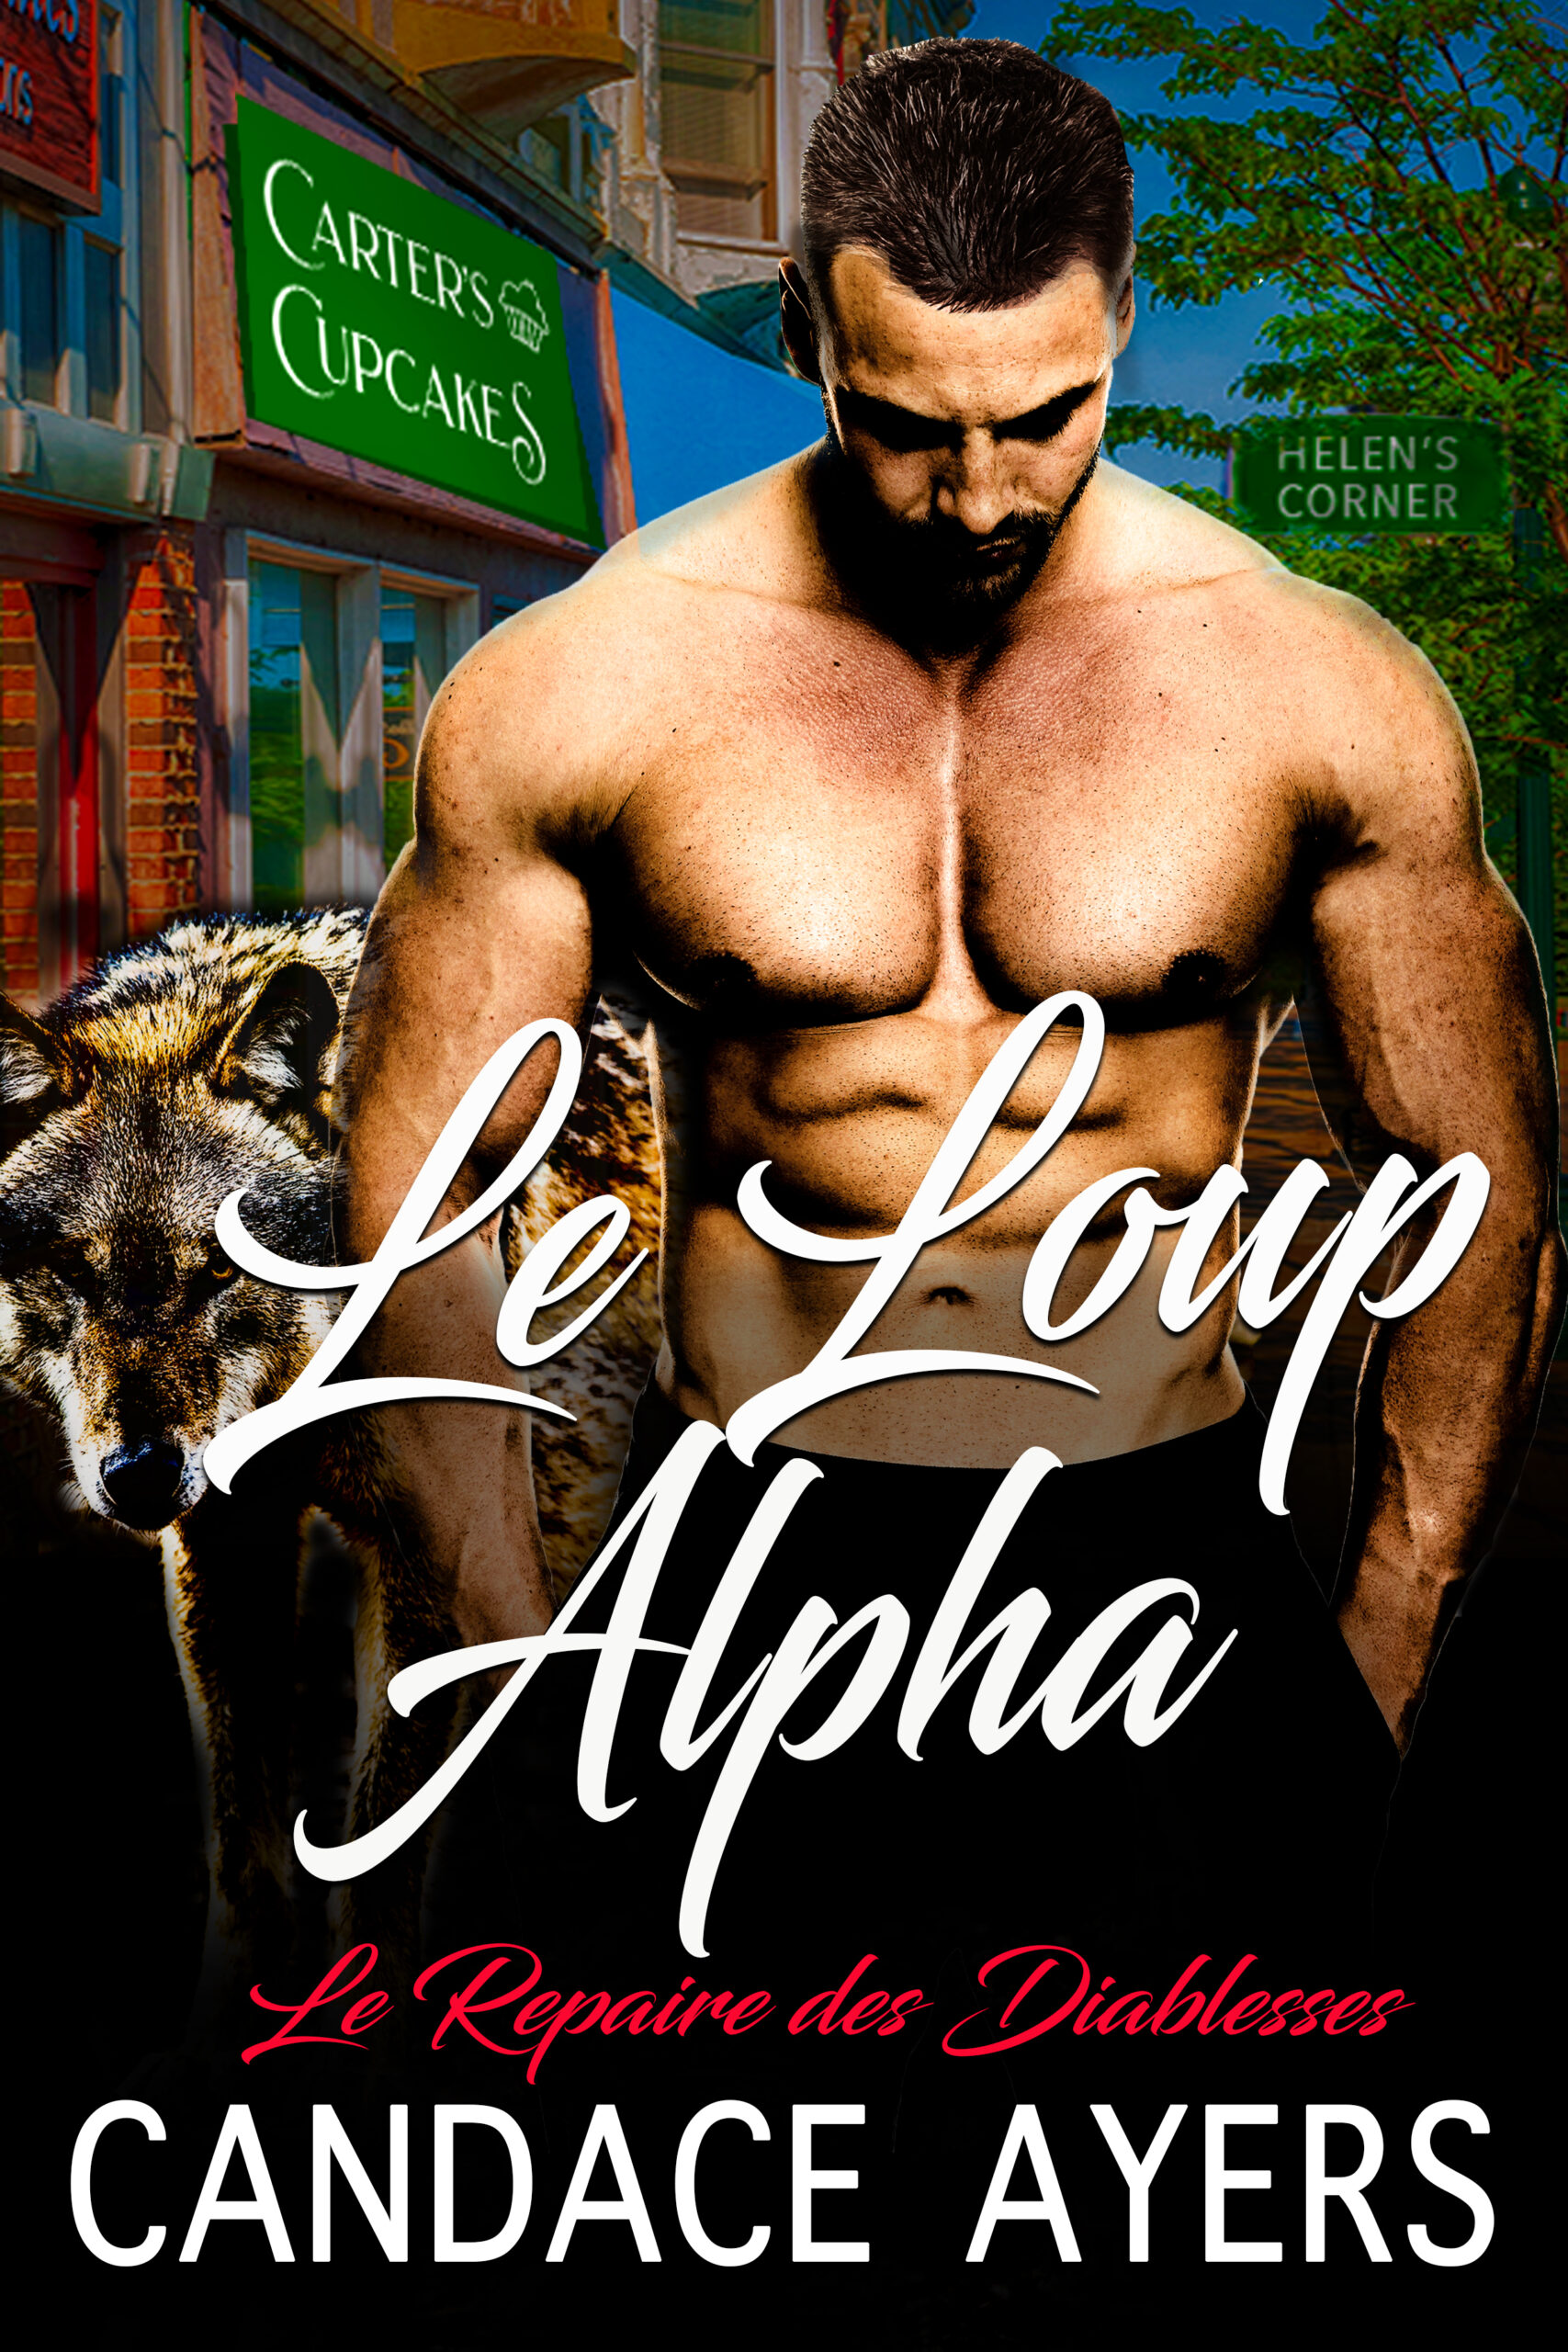 Le Loup Alpha Candace Ayers Paranormal Romance